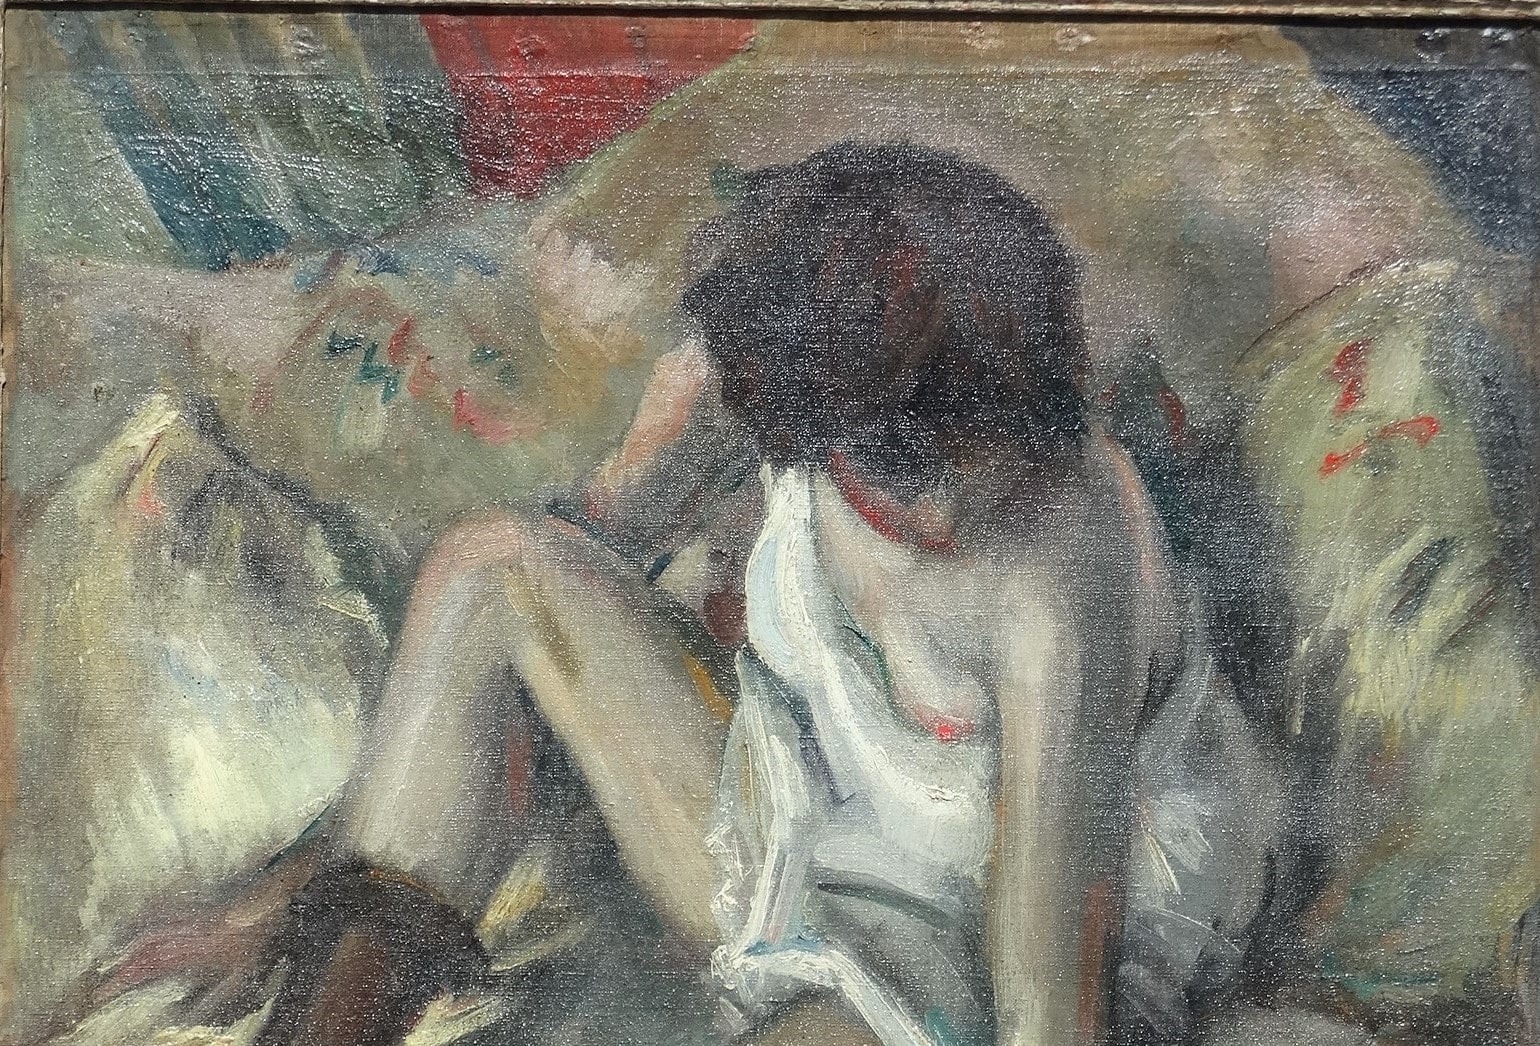 Ullman's Nude Woman. A woman with short messy hair in a state of partial undress. Less than comfortable, in brushwork.